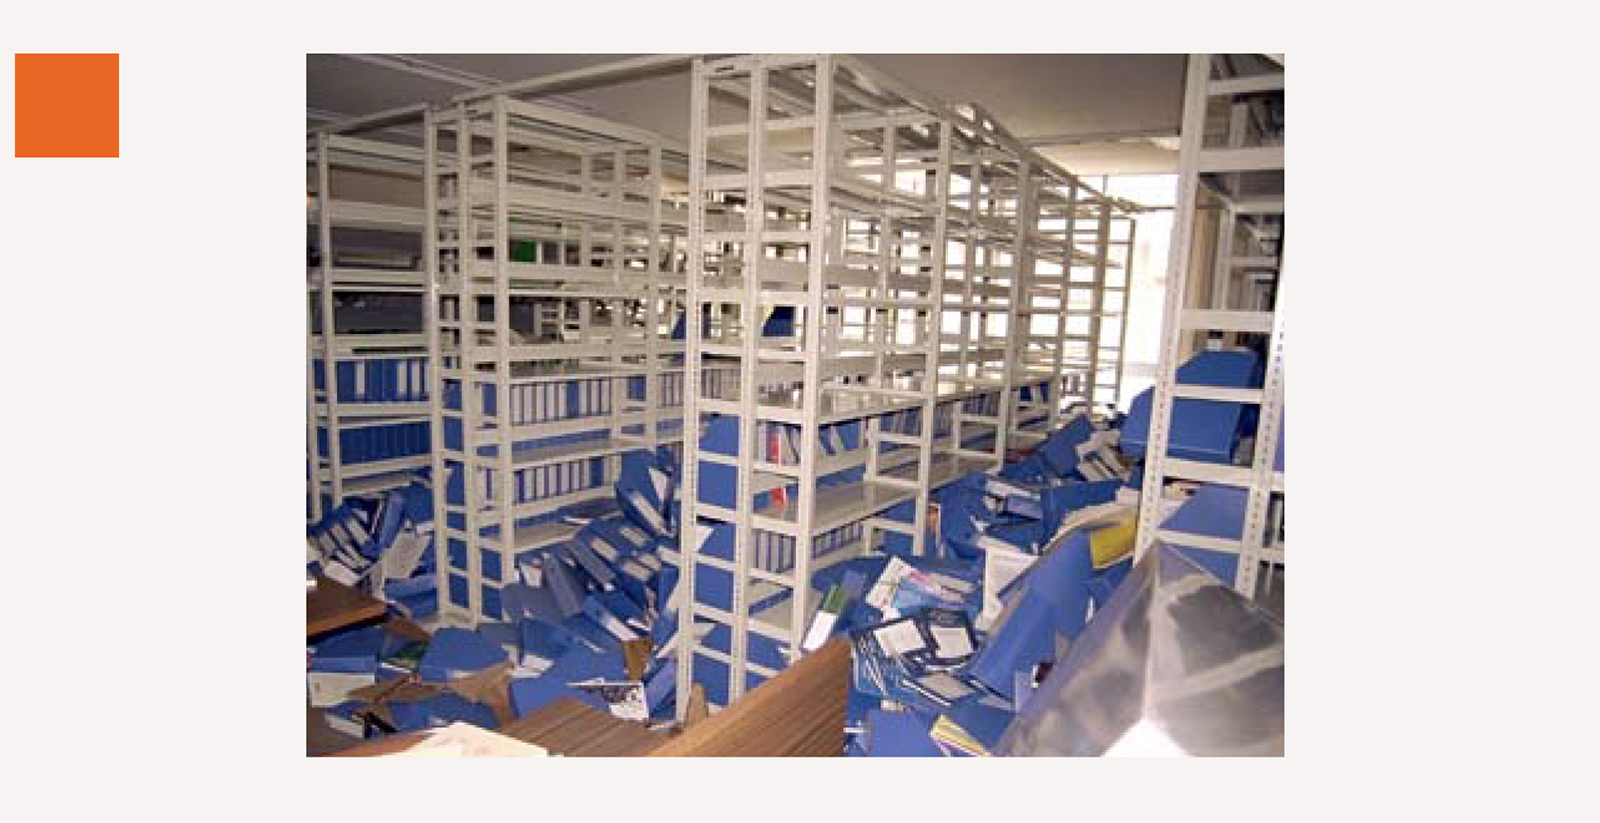 A photograph of toppled books at Japan’s Kobe University Library in the aftermath of an earthquake on 17 January 1995.